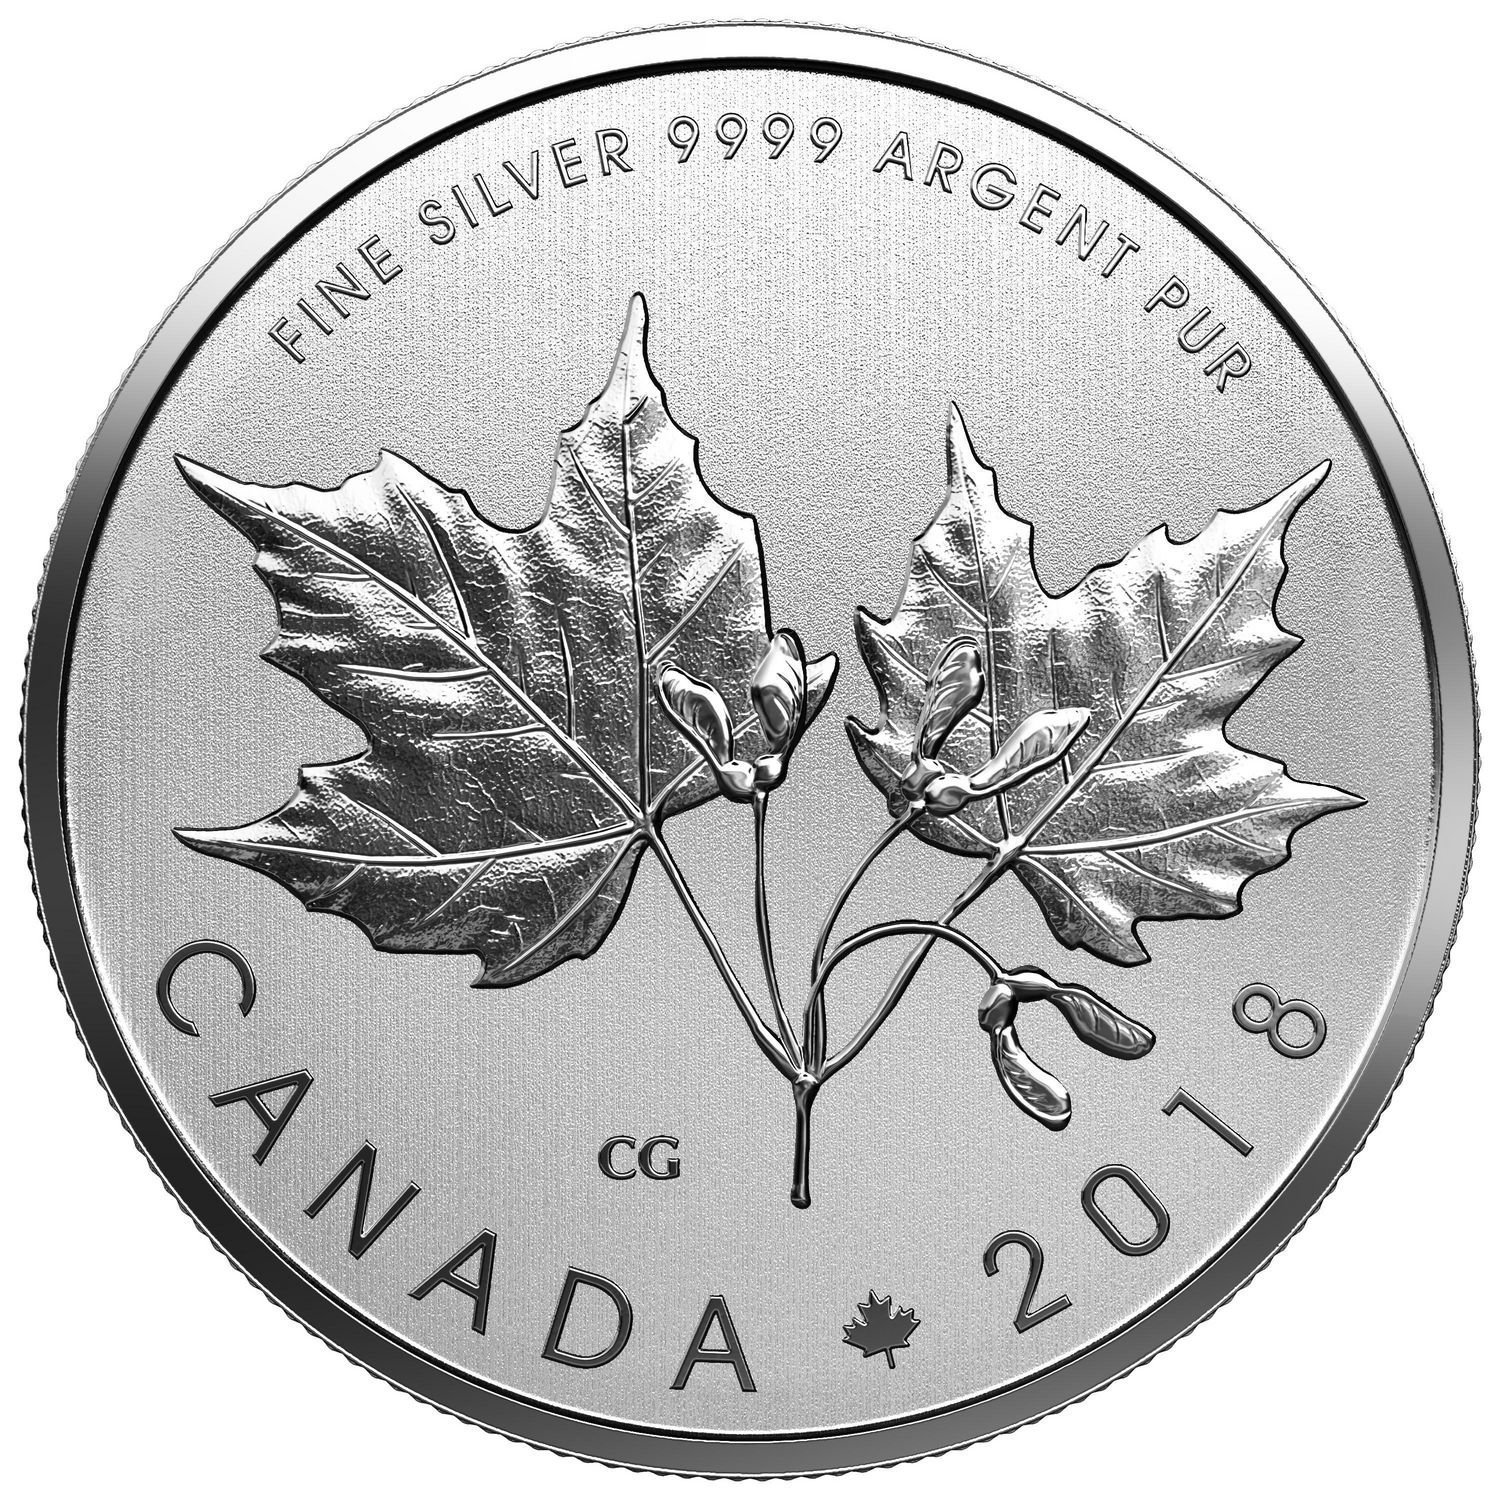 Canadian Silver Maple Leaf Coin 99.99 Fine Silver by The Royal